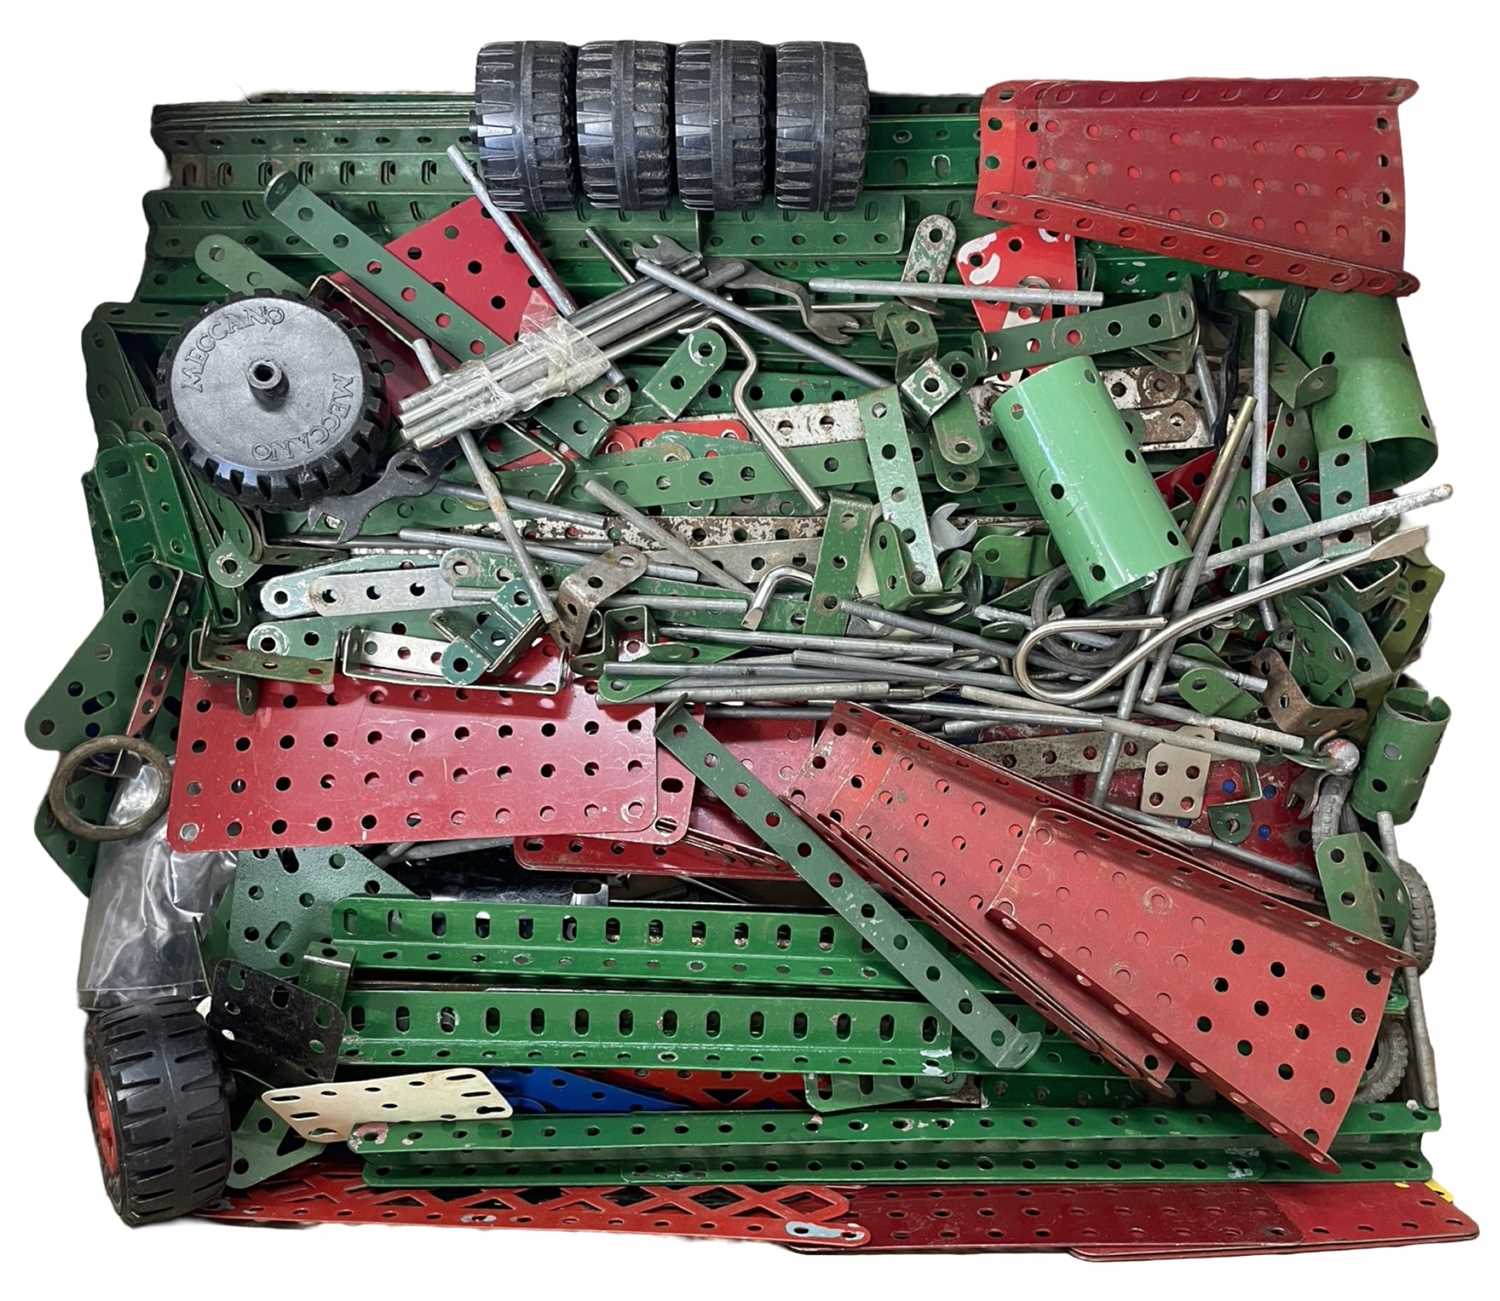 A quantity of Meccano, together with instruction manuals 1-5 and a copy of Meccano Magazine